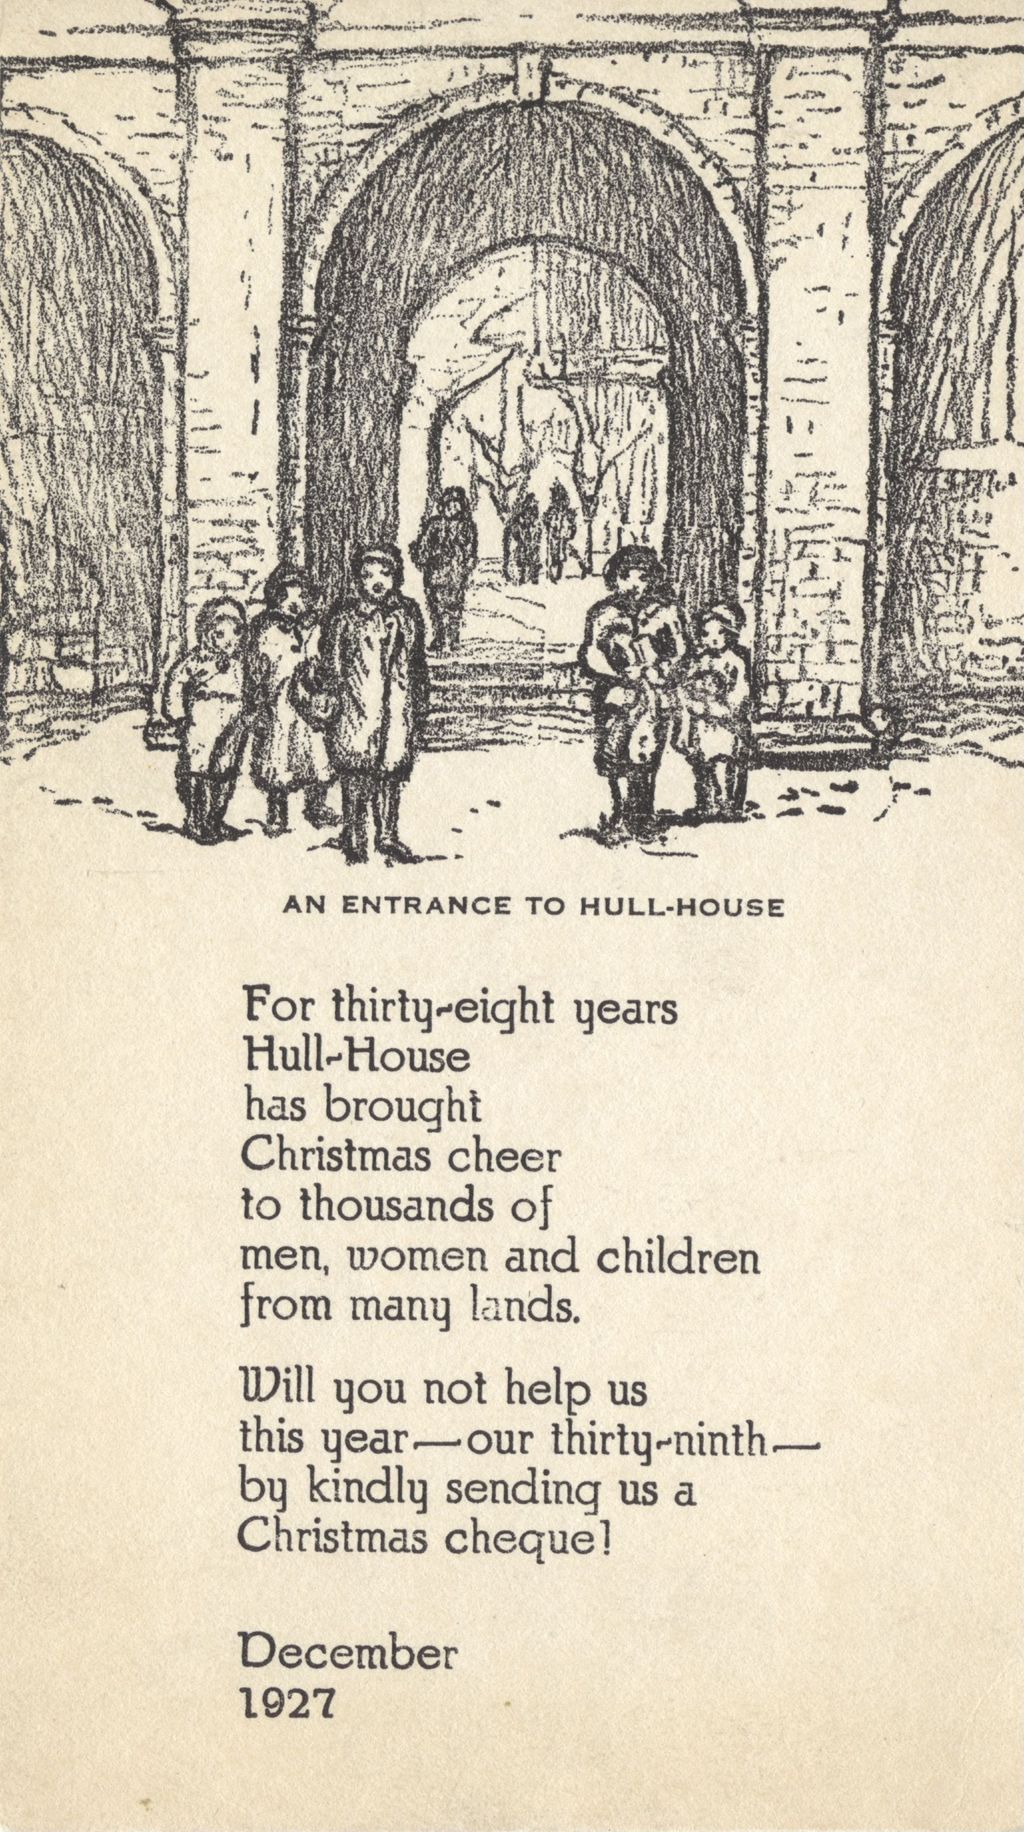 Fundraising card for Christmas 1927 with illustration of children outside arched entrance to Hull-House courtyard